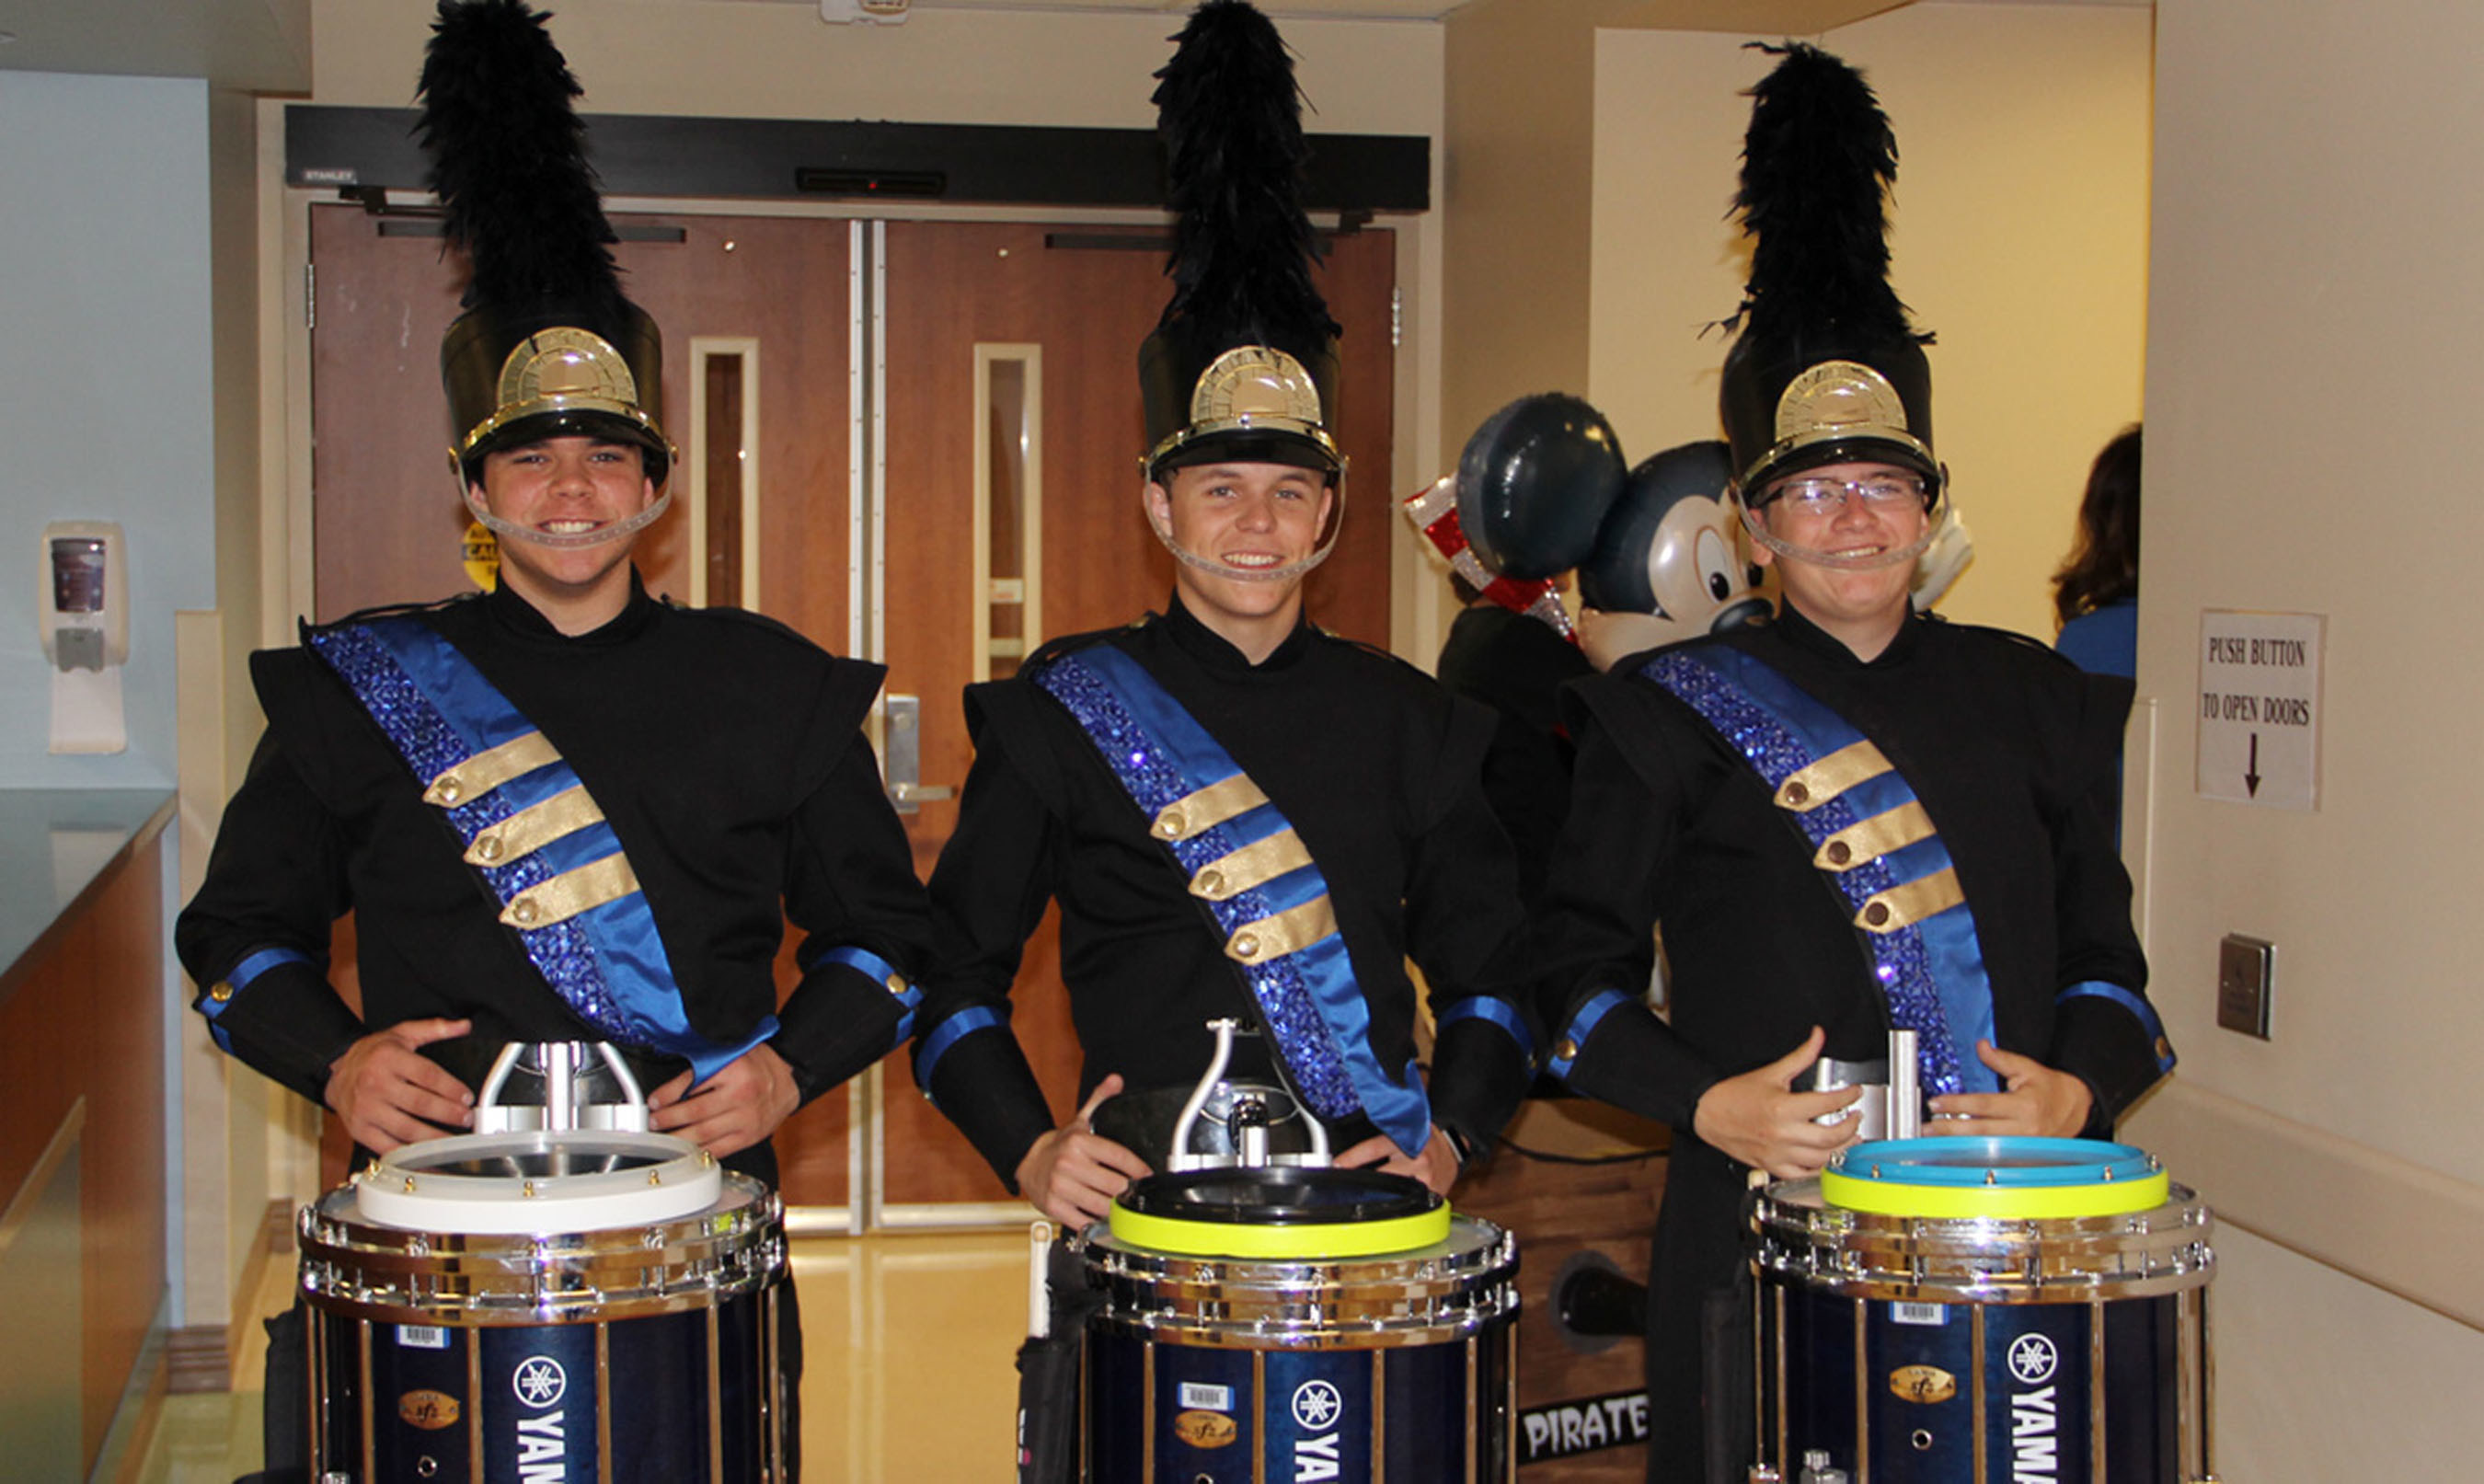 Seniors and snare drummers Matt Mohr, J.D. Dickson and Patrick Sanchez of the Cypress Ranch High School Marching Band led the parade